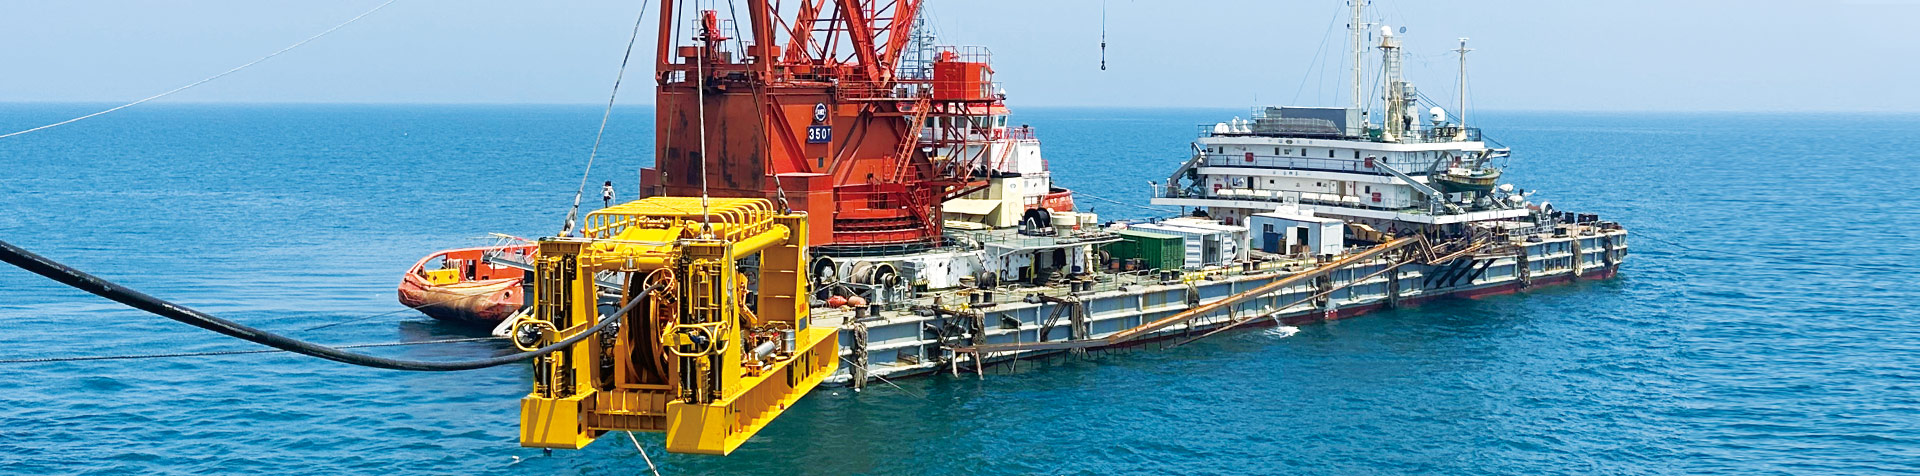 To Be the World's Most Professional Offshore Engineering Equipment Manufacturer & Service Providers